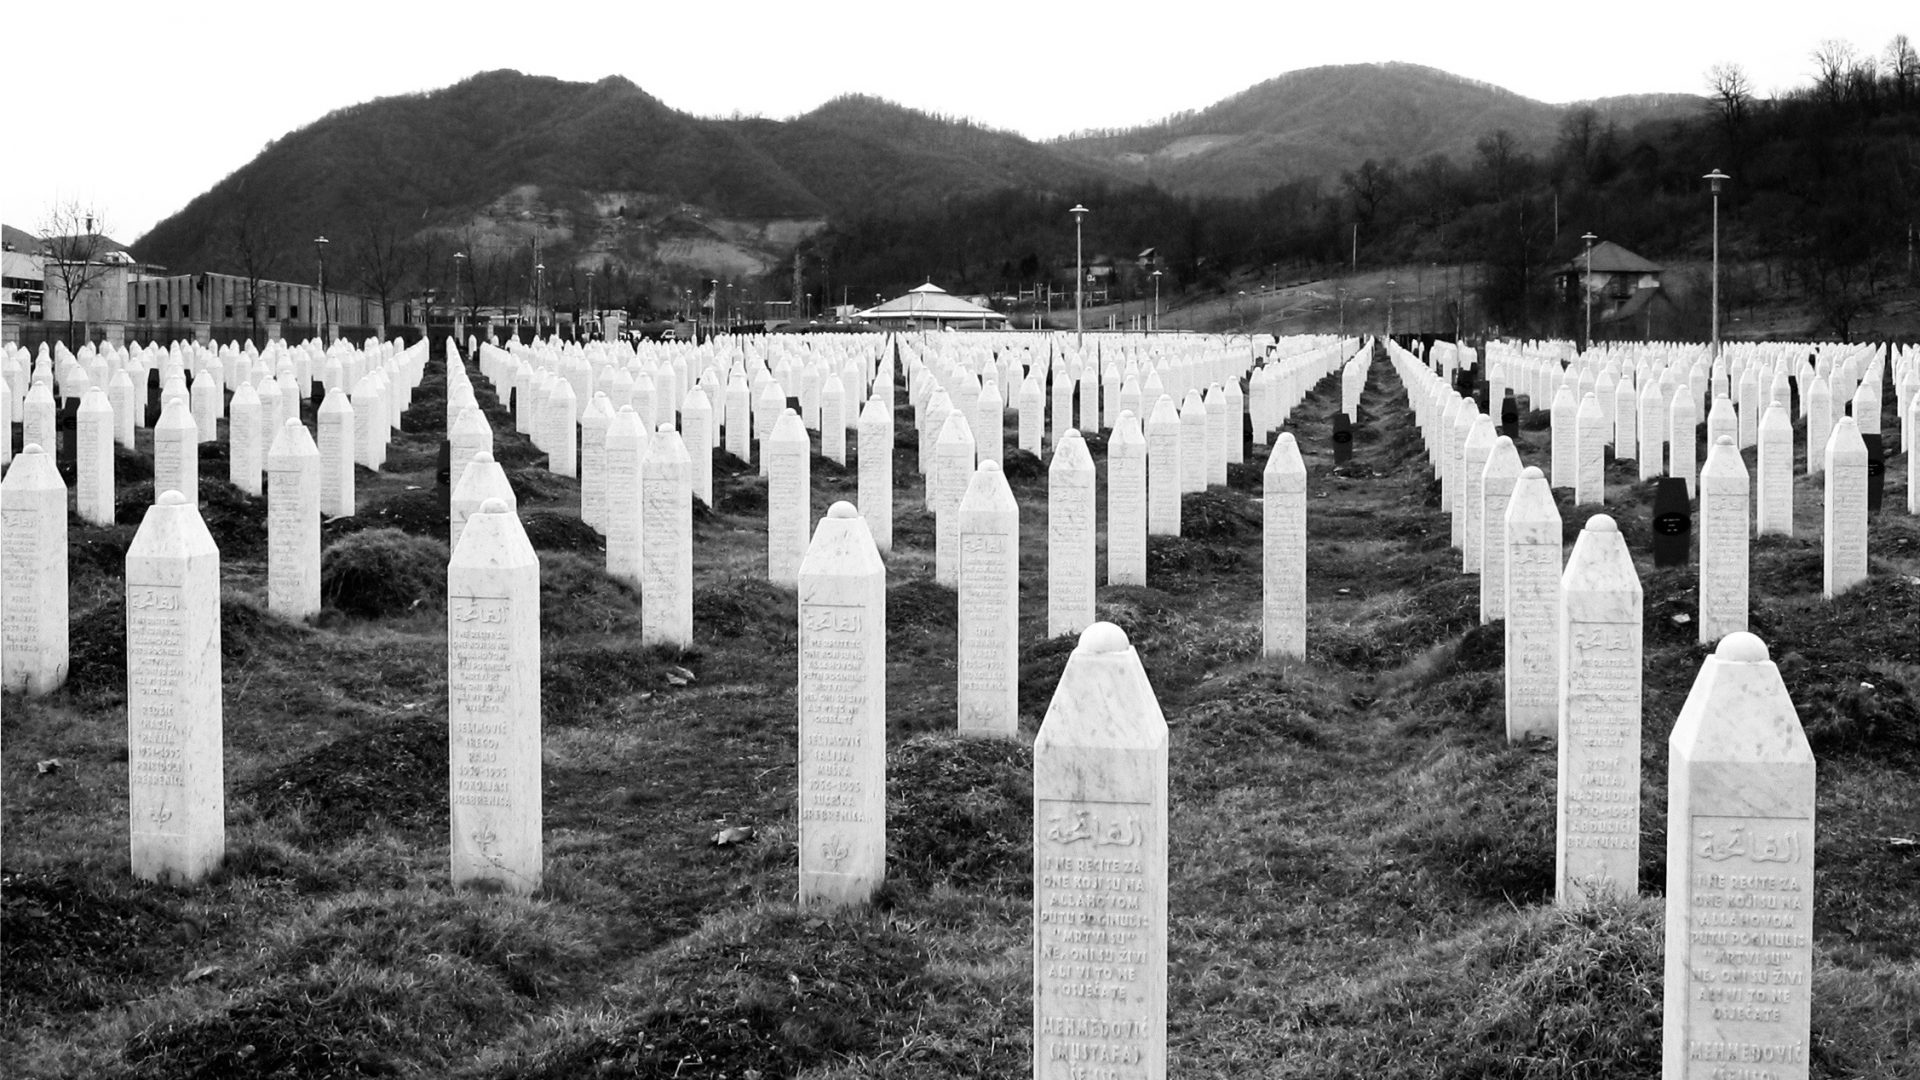 A field of white tomb stones representing those that dies in the massacre.